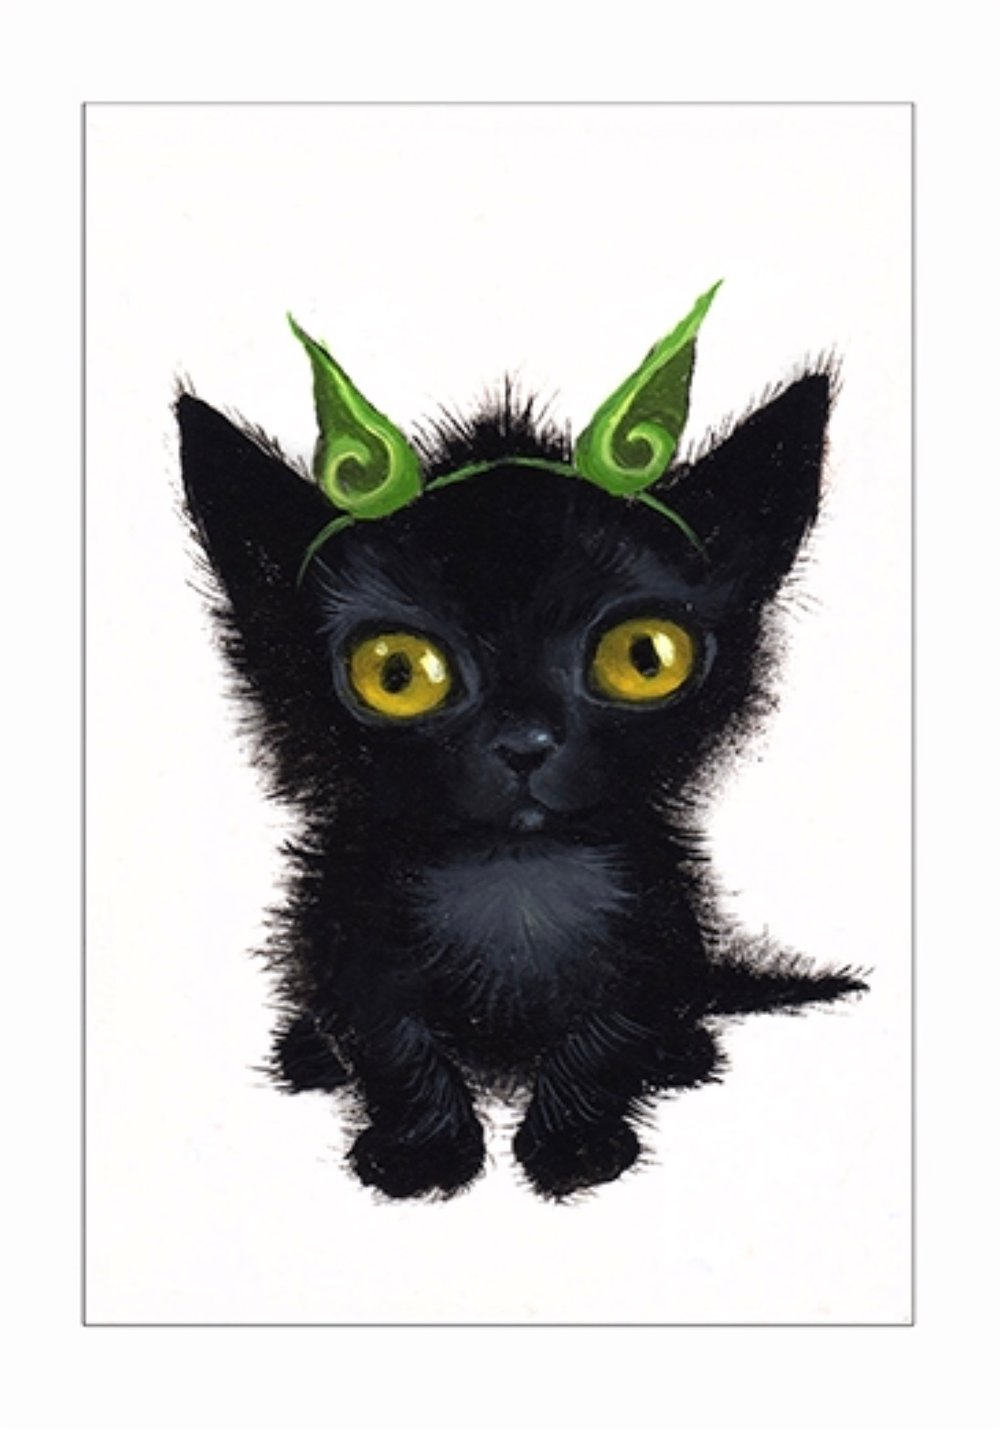 Image of “Goblin” archival ACEO print